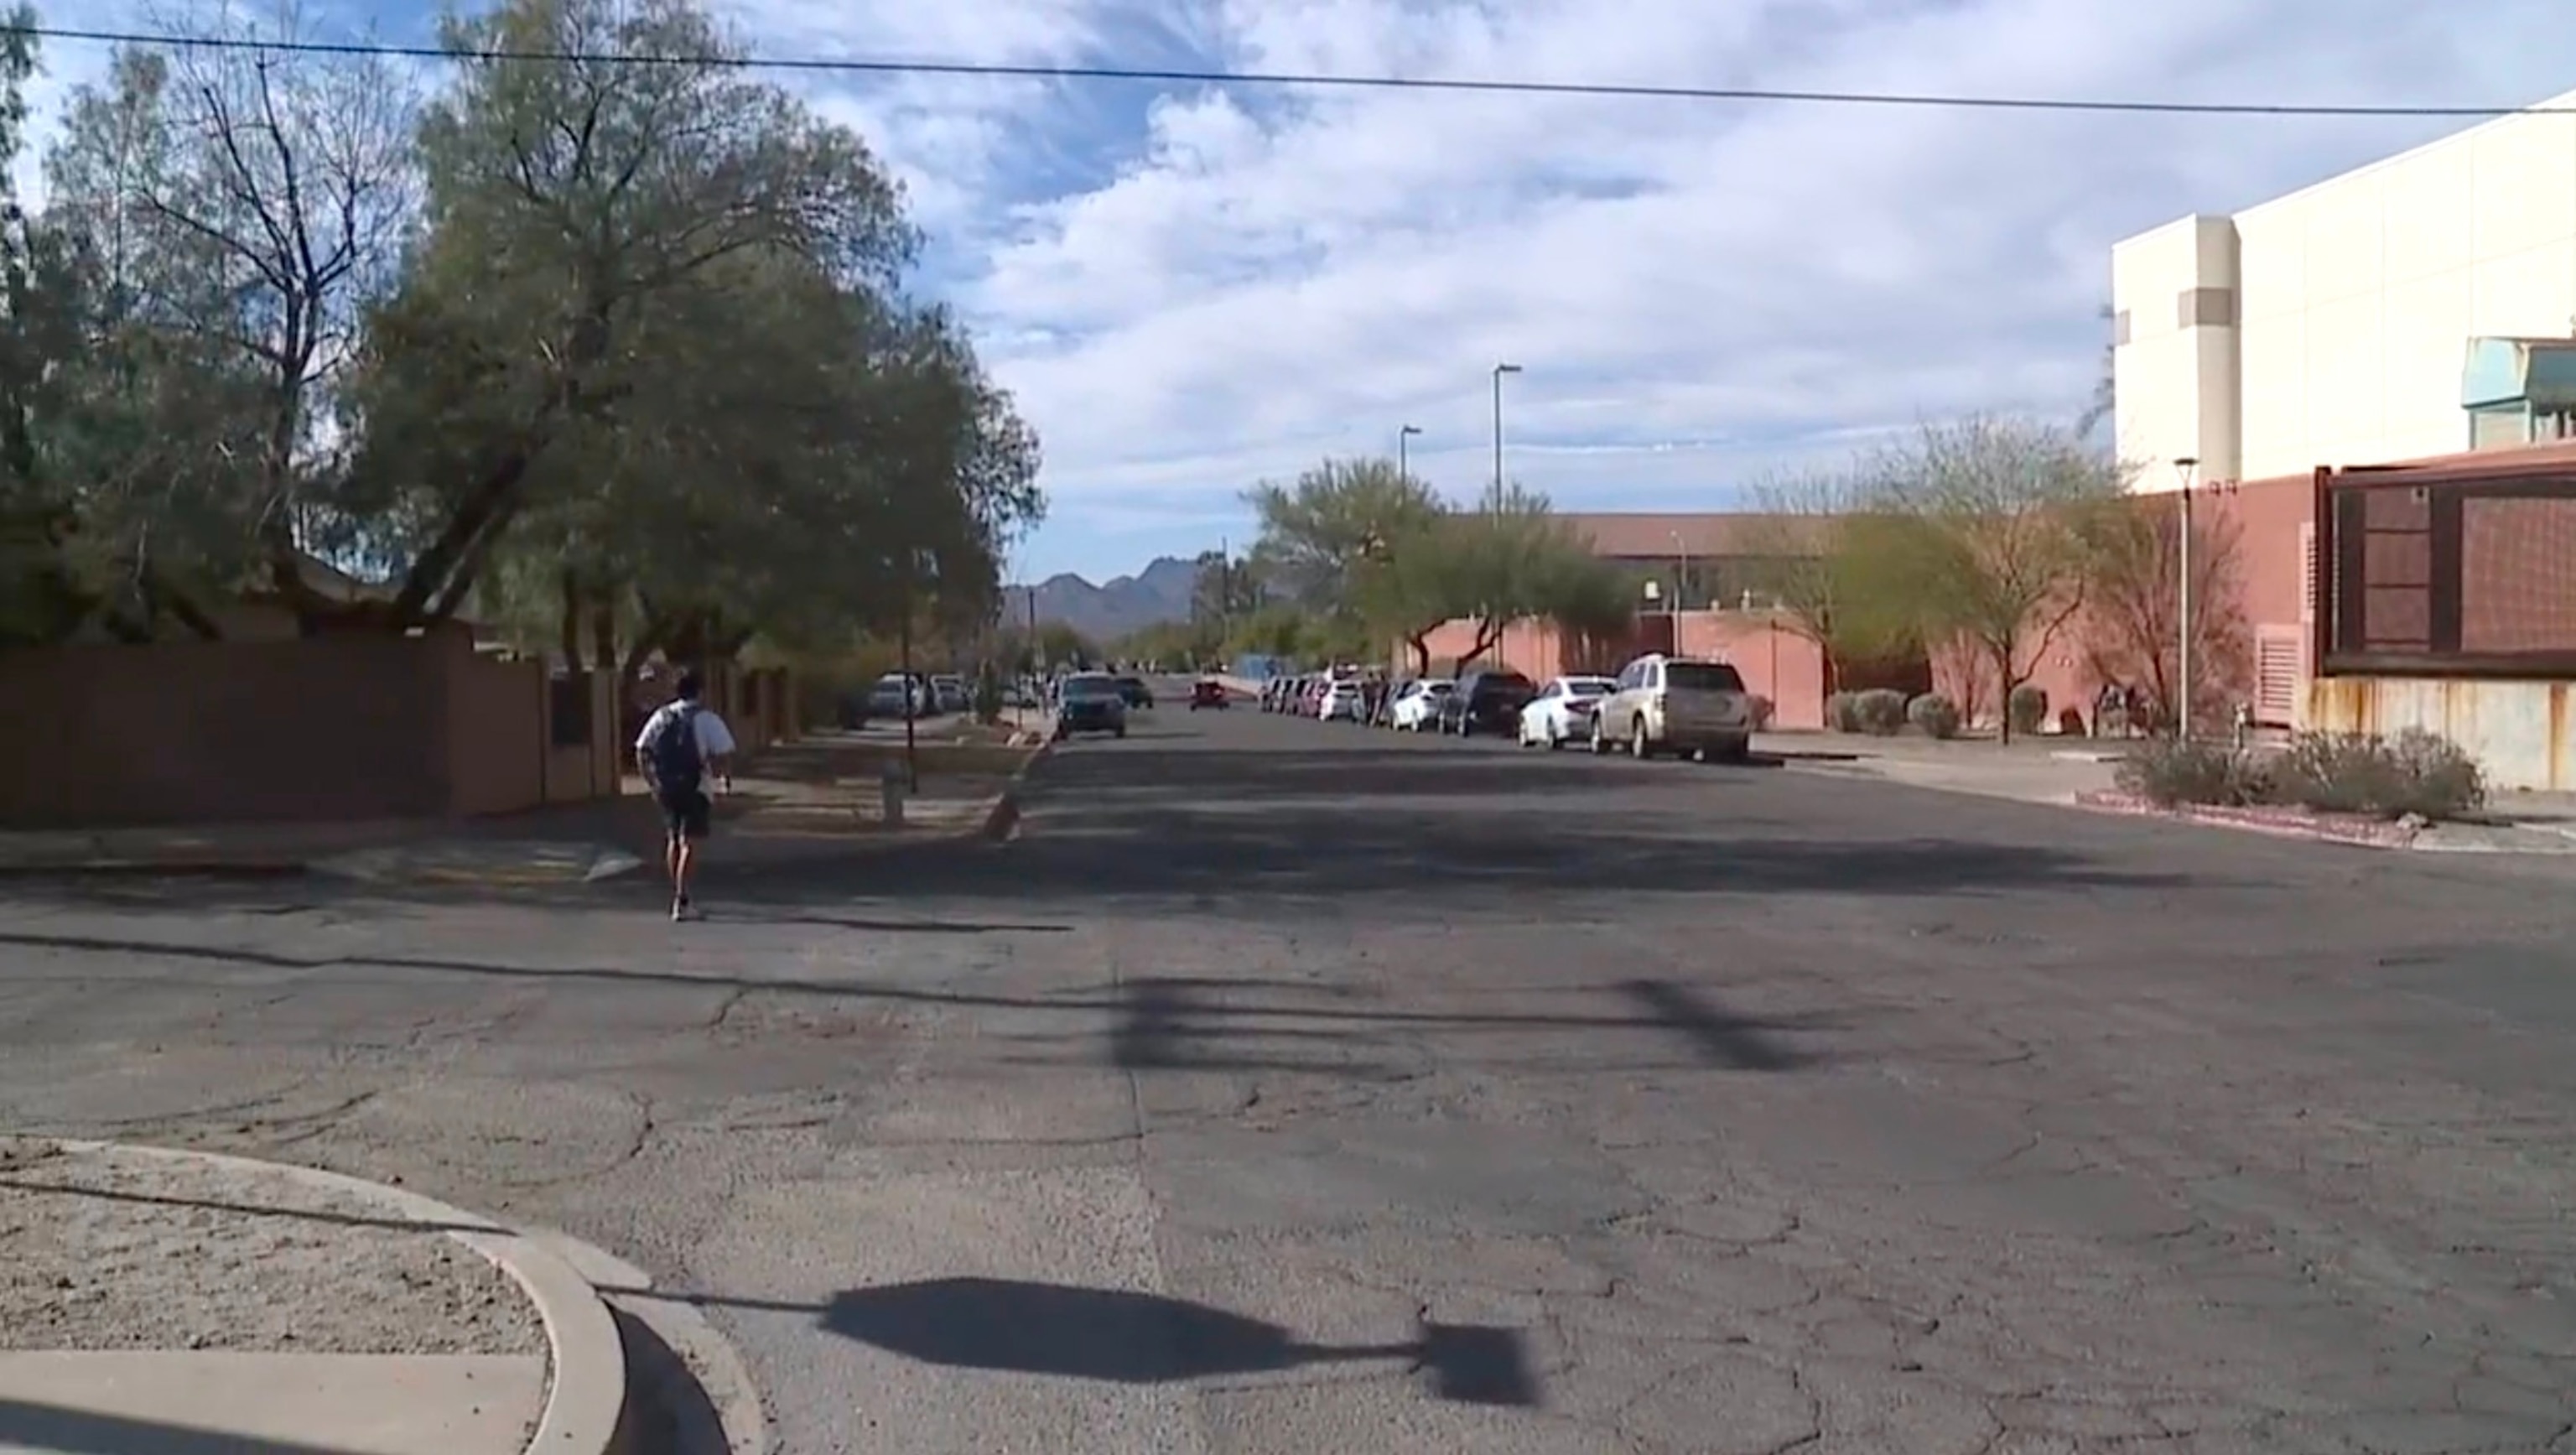 PHOTO: A University of Arizona student reported a sexual assault in the area of E. Seventh Street and North Vine Avenue in Tucson on Dec. 11, police said.